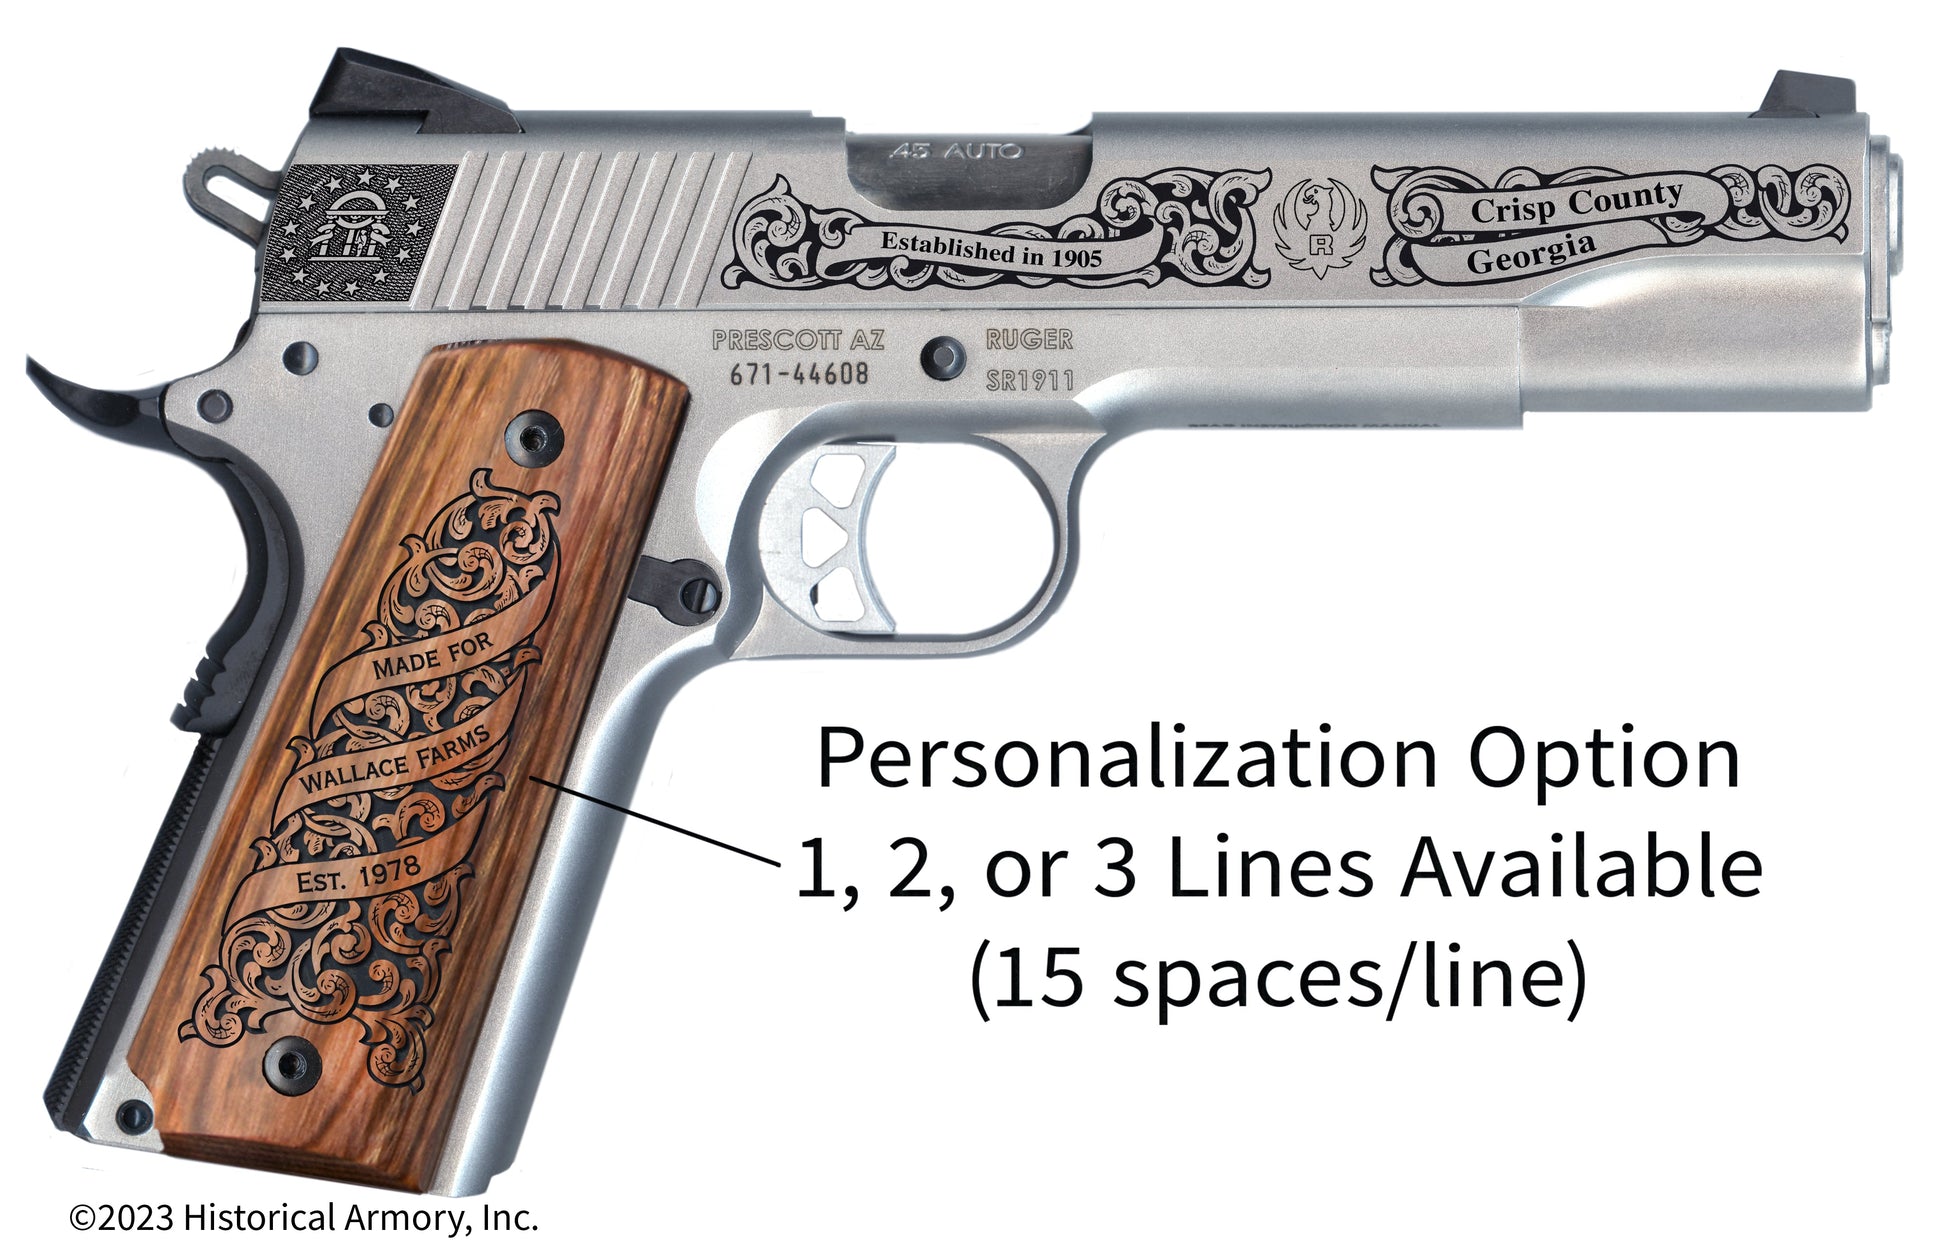 Crisp County Georgia Personalized Engraved .45 Auto Ruger 1911